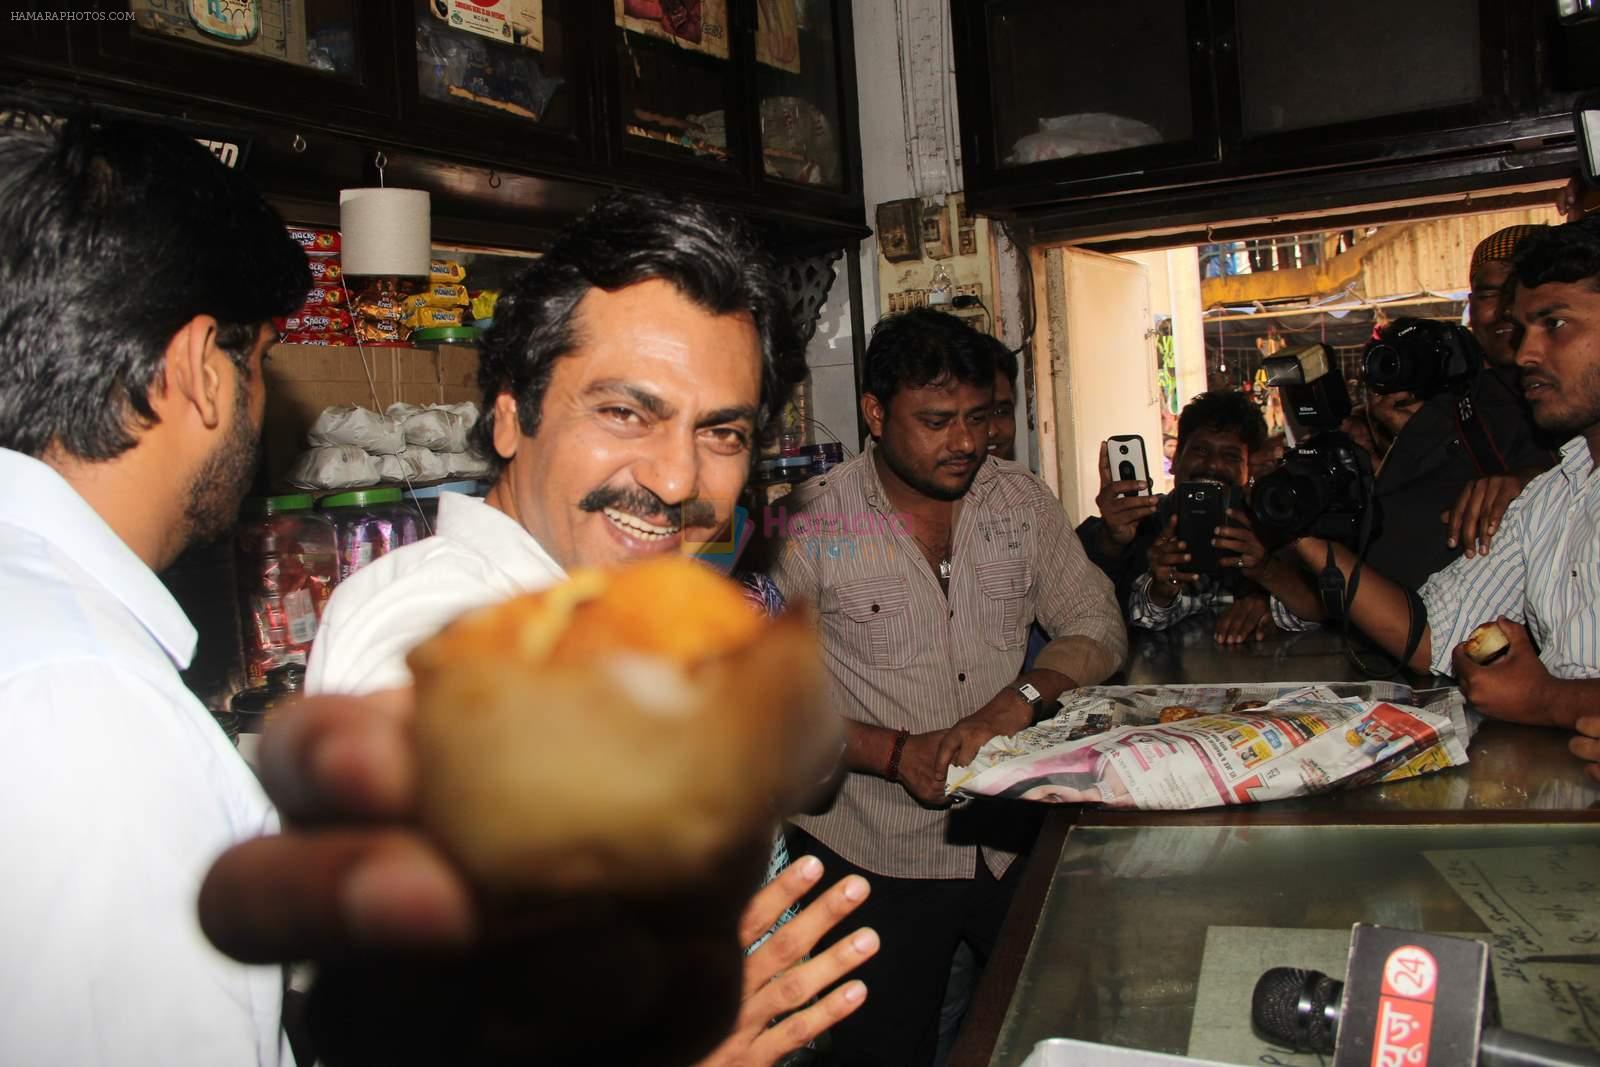 Nawazuddin Siddiqui at an Irani cafe for Ritesh Batra's Poetic license launch in Grant Road on 4th April 2015